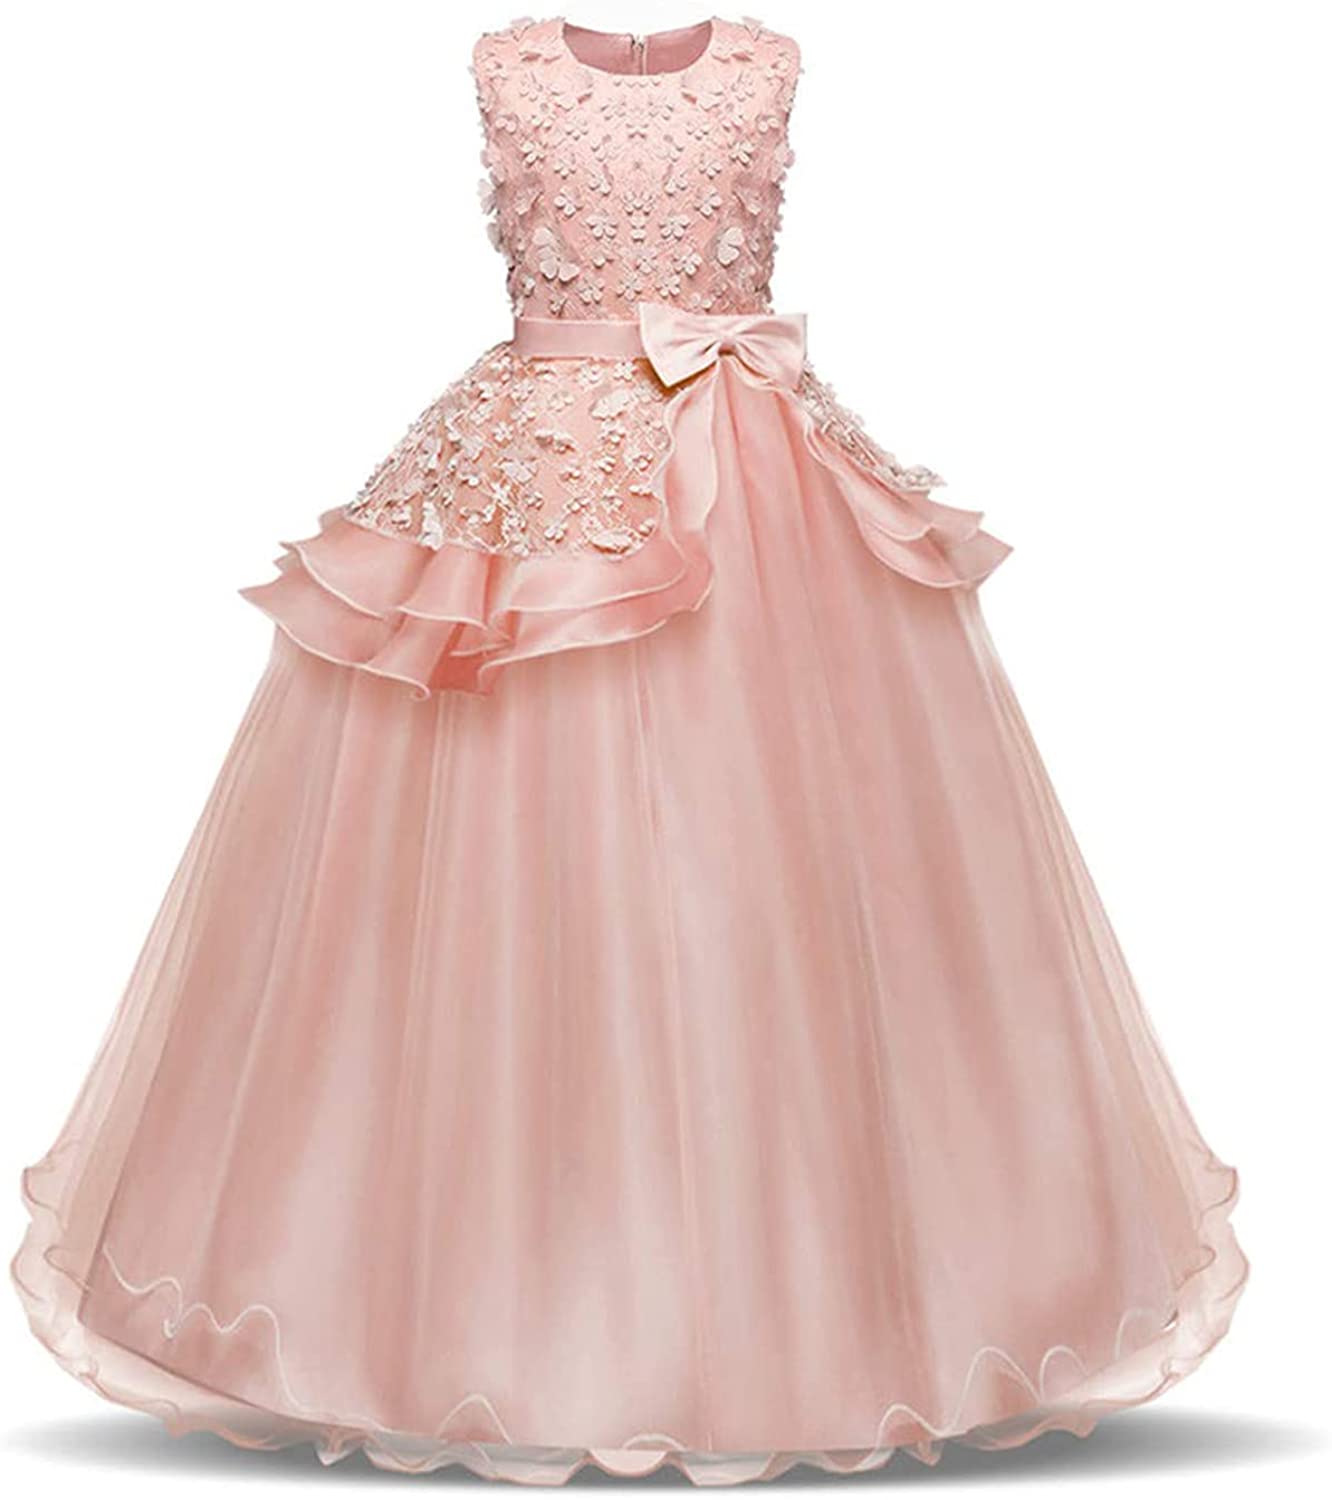 NNJXD Girls Princess Pageant Dress Kids Prom Ball Gowns Wedding Party Flower Dresses 